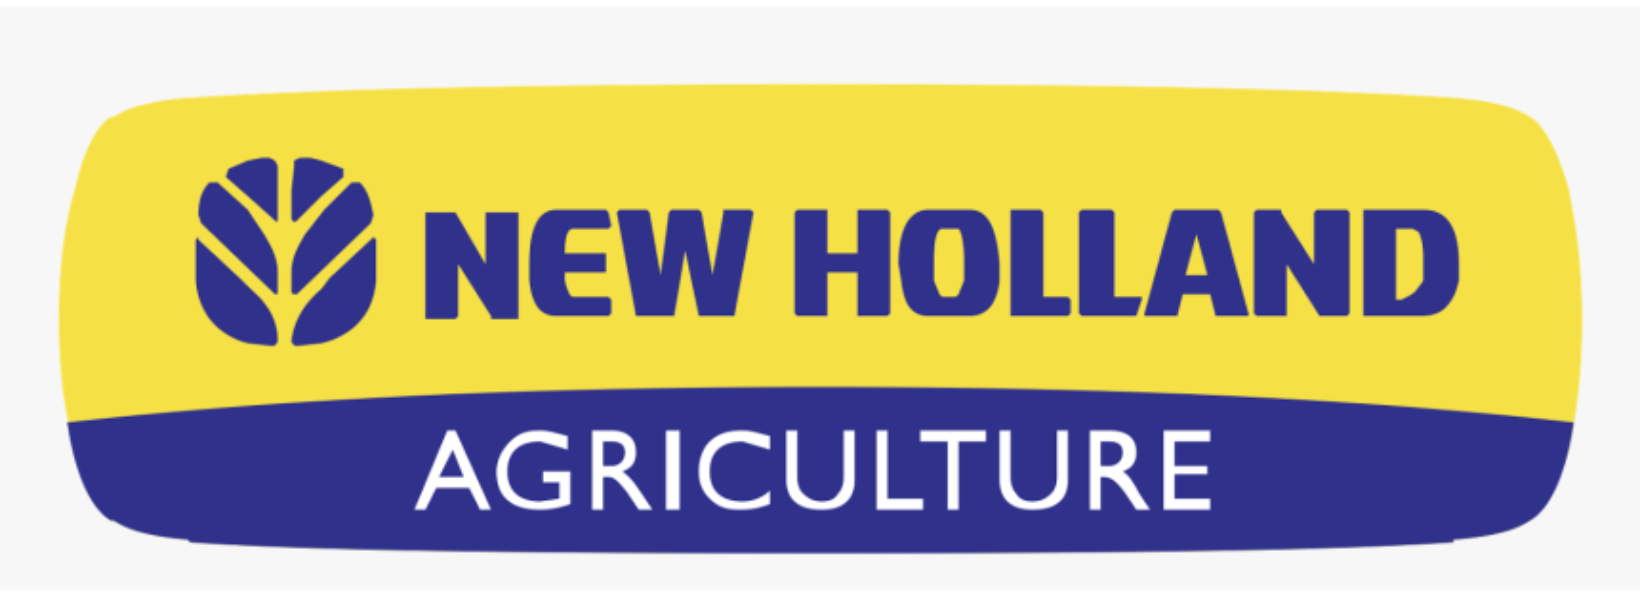 https://agriculture.newholland.com